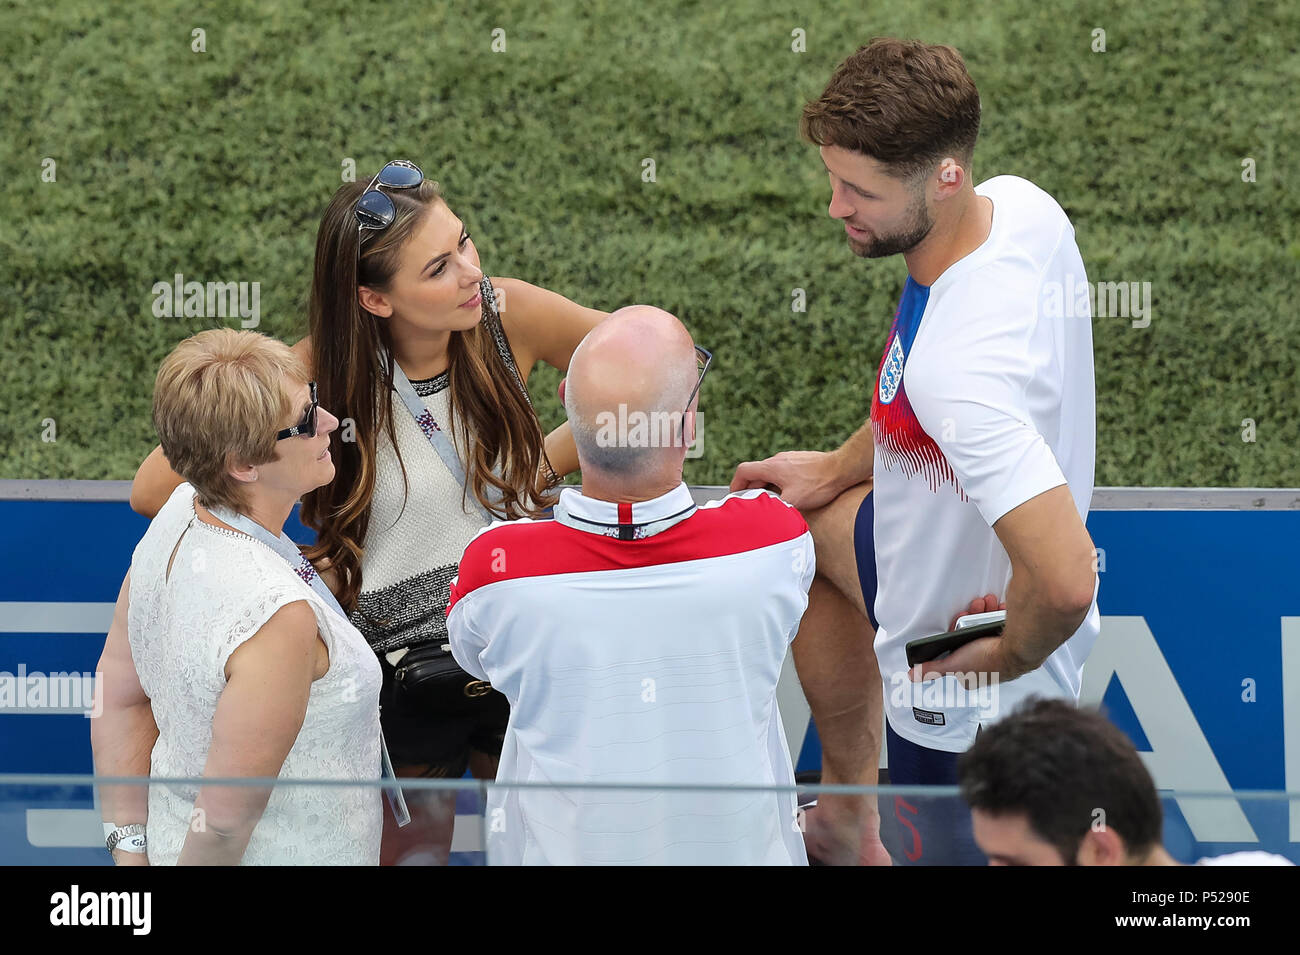 Nizhny Novgorod, Russia. 24th June, 2018. Gary Cahill of England with his wife Gemma Acton after the 2018 FIFA World Cup Group G match between England and Panama at Nizhny Novgorod Stadium on June 24th 2018 in Nizhny Novgorod, Russia. (Photo by Daniel Chesterton/phcimages.com) Credit: PHC Images/Alamy Live News Stock Photo